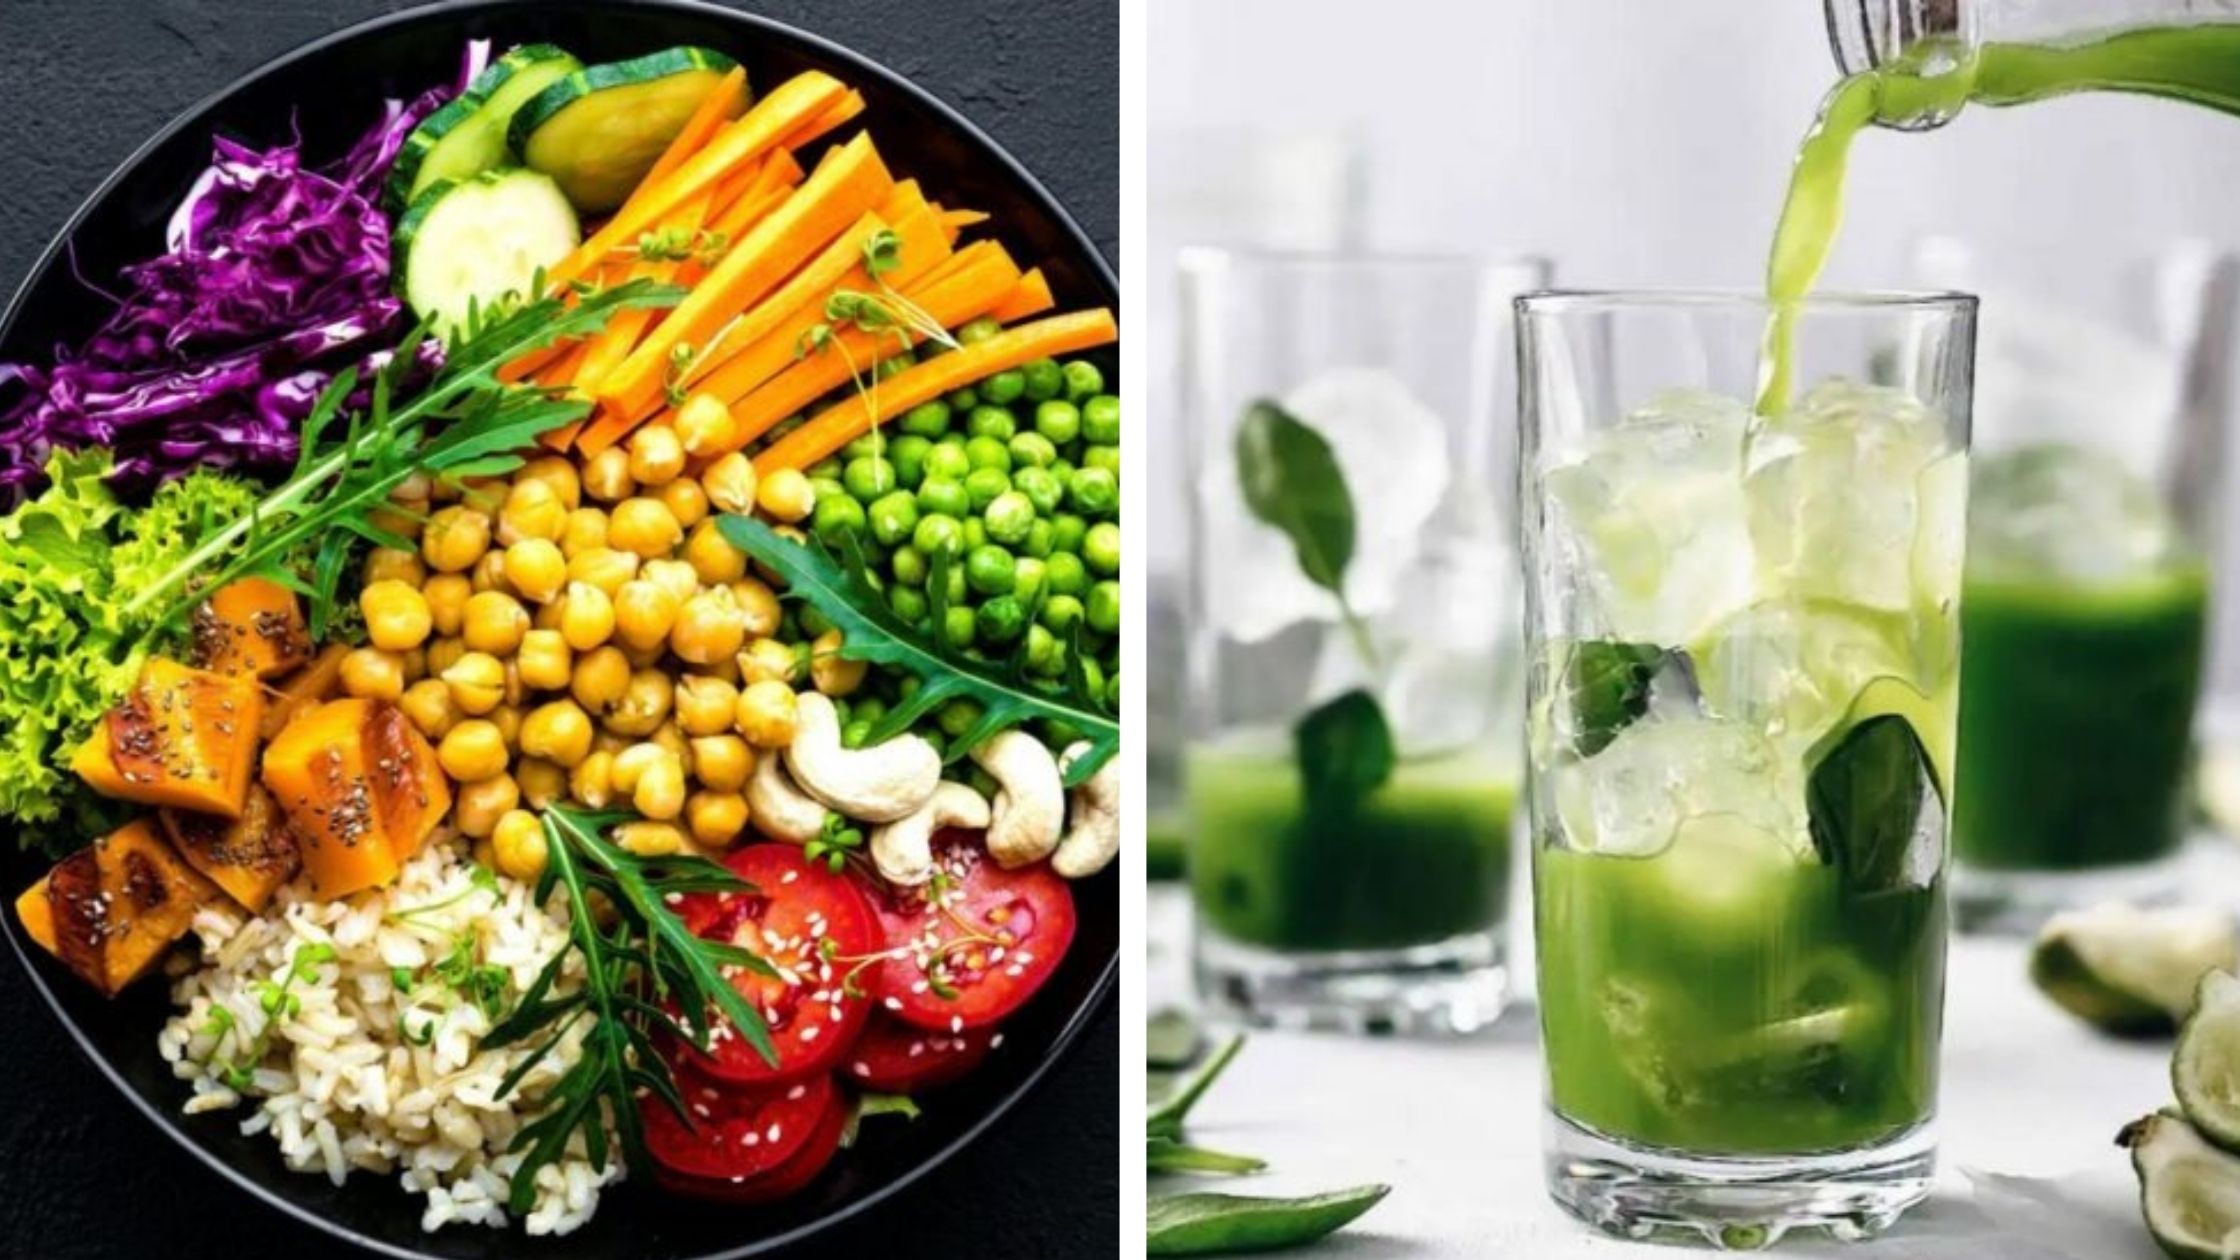 5 Best Places For Healthy Juices and Salads In Ahmedabad